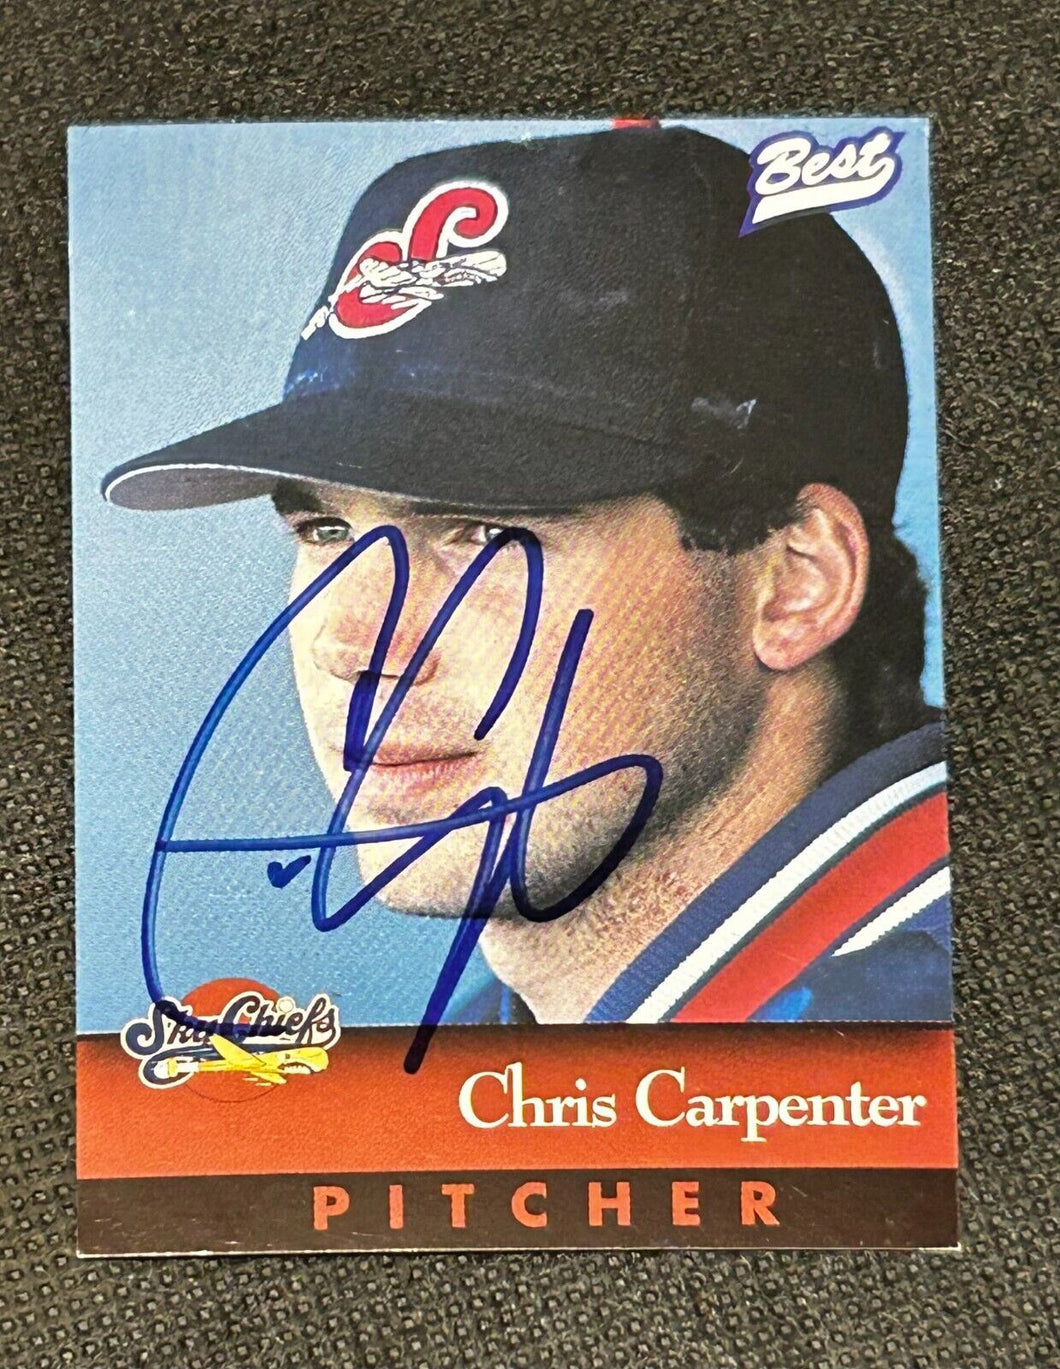 1997 Knoxville Chris Carpenter Signed Baseball Card, EX+ condition